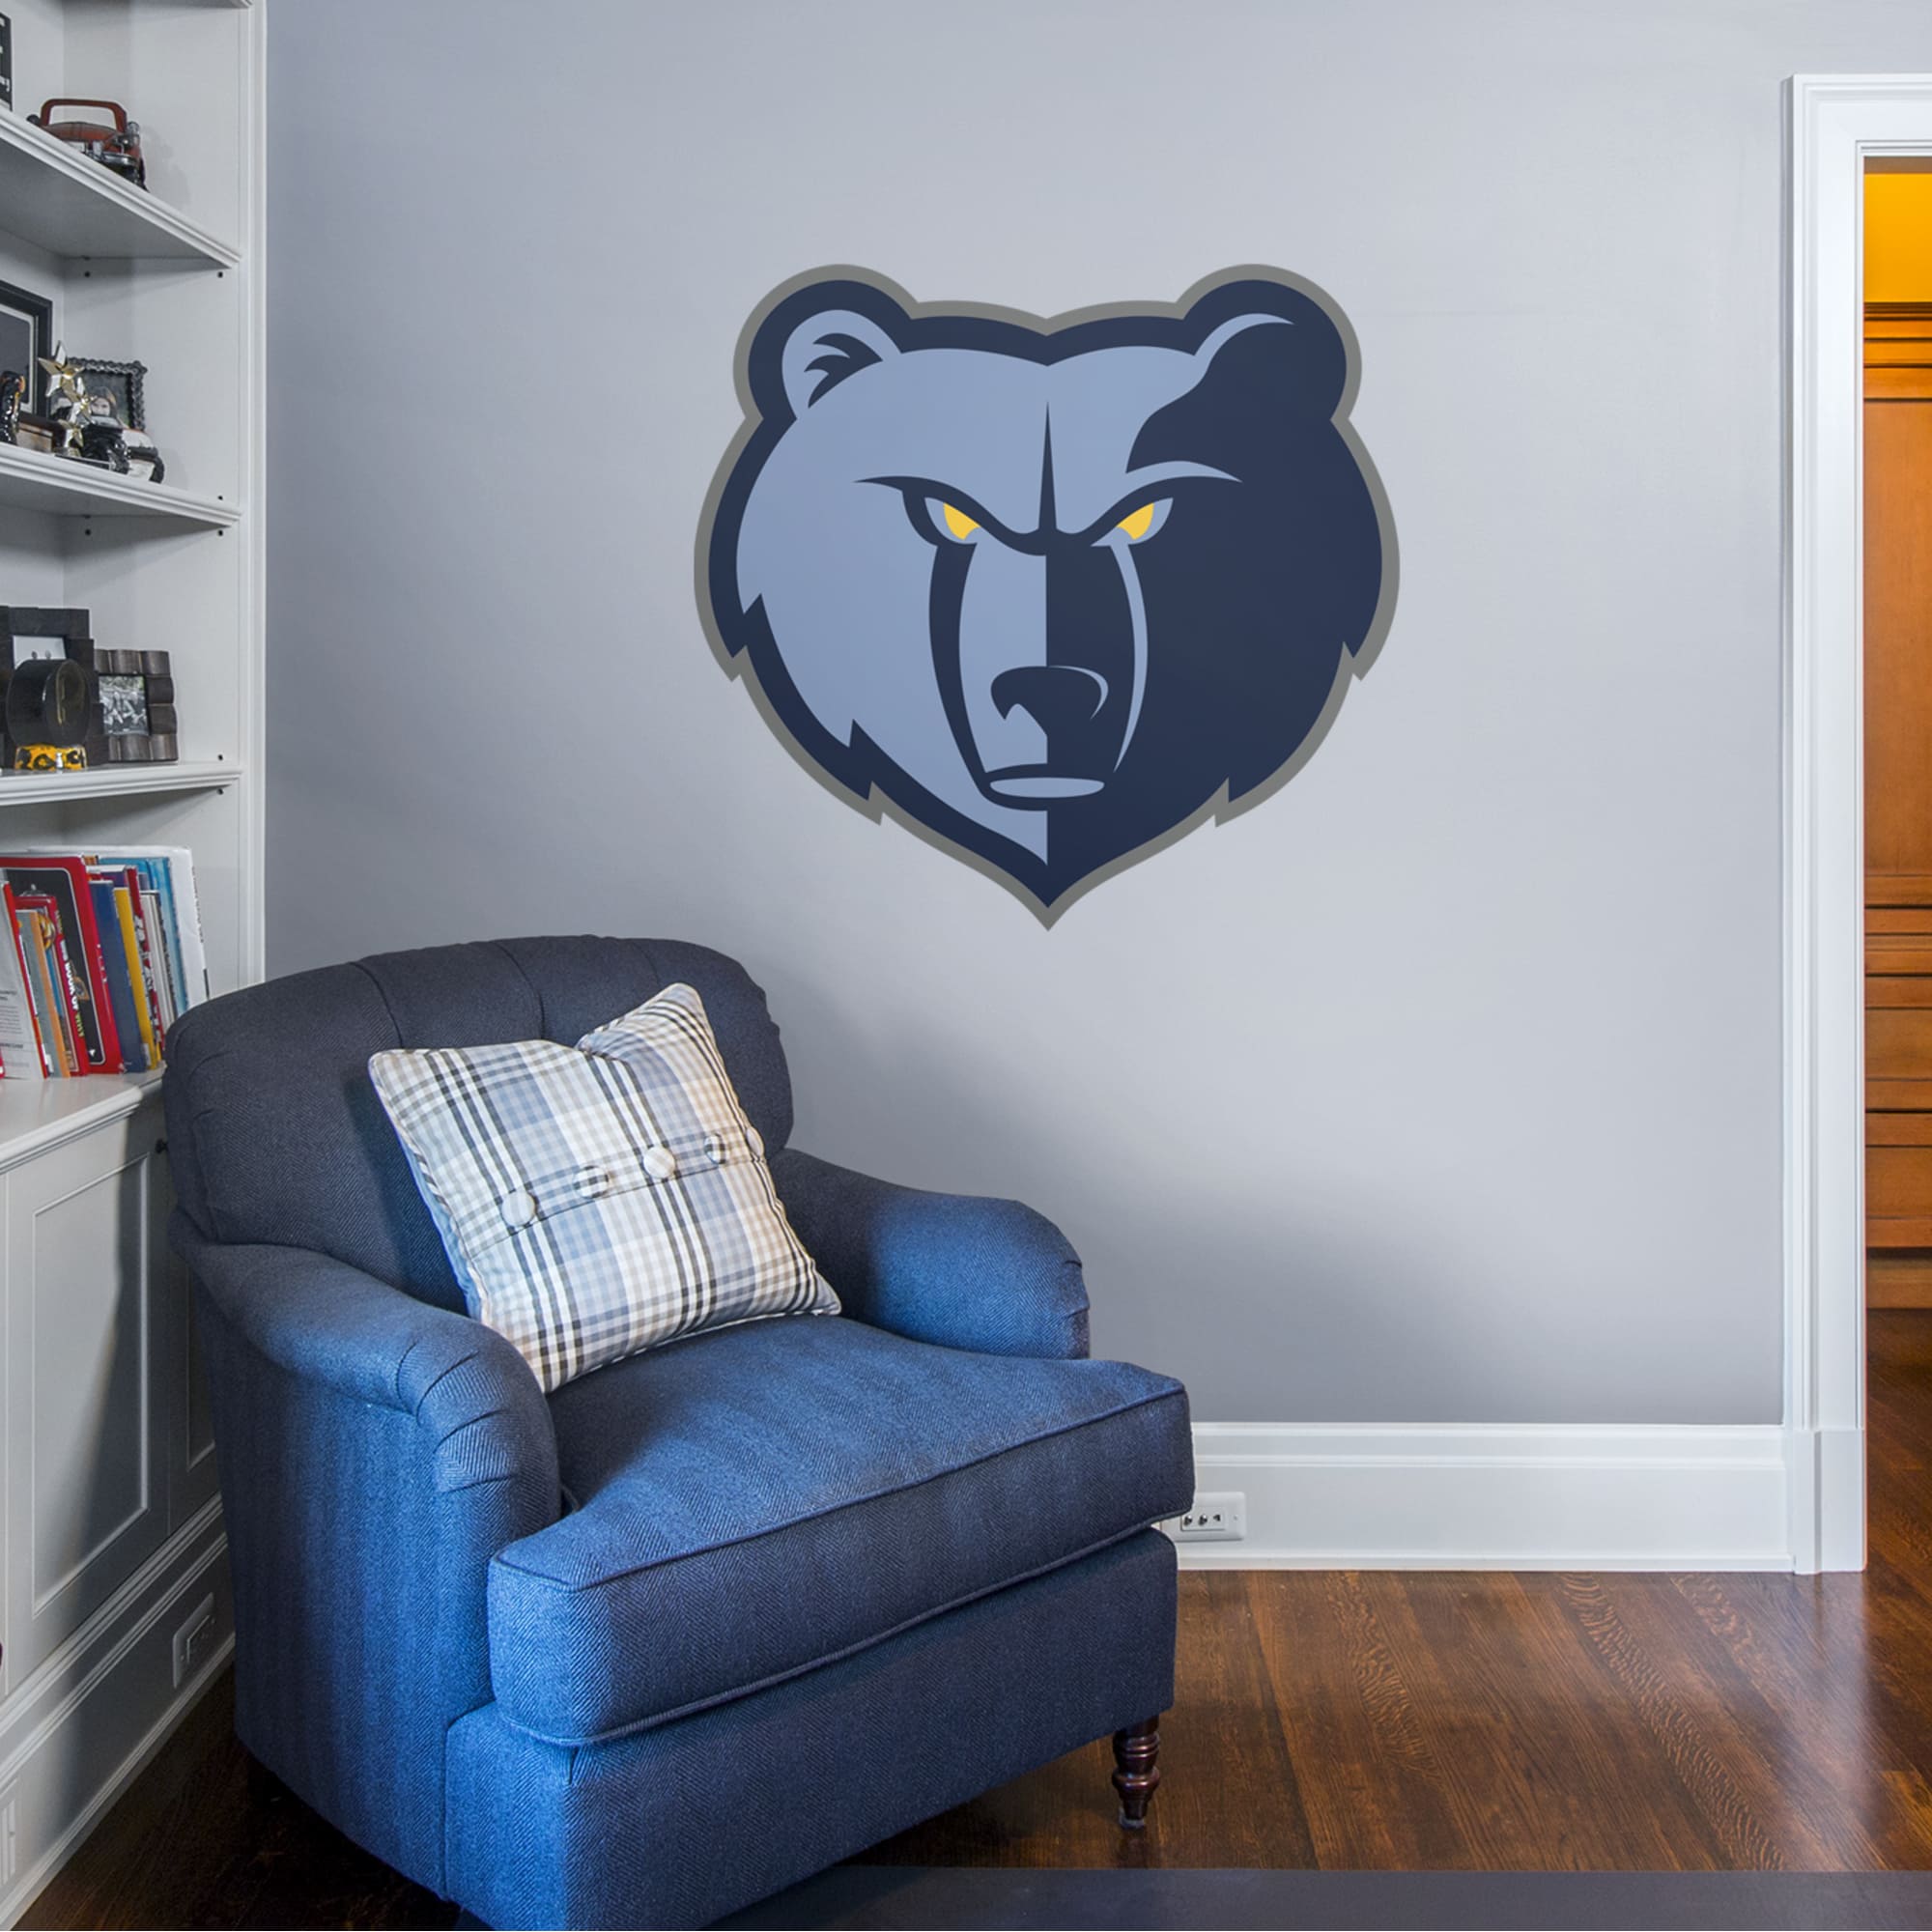 Memphis Grizzlies: Logo - Officially Licensed NBA Removable Wall Decal Giant Logo (41"W x 38"H) by Fathead | Vinyl